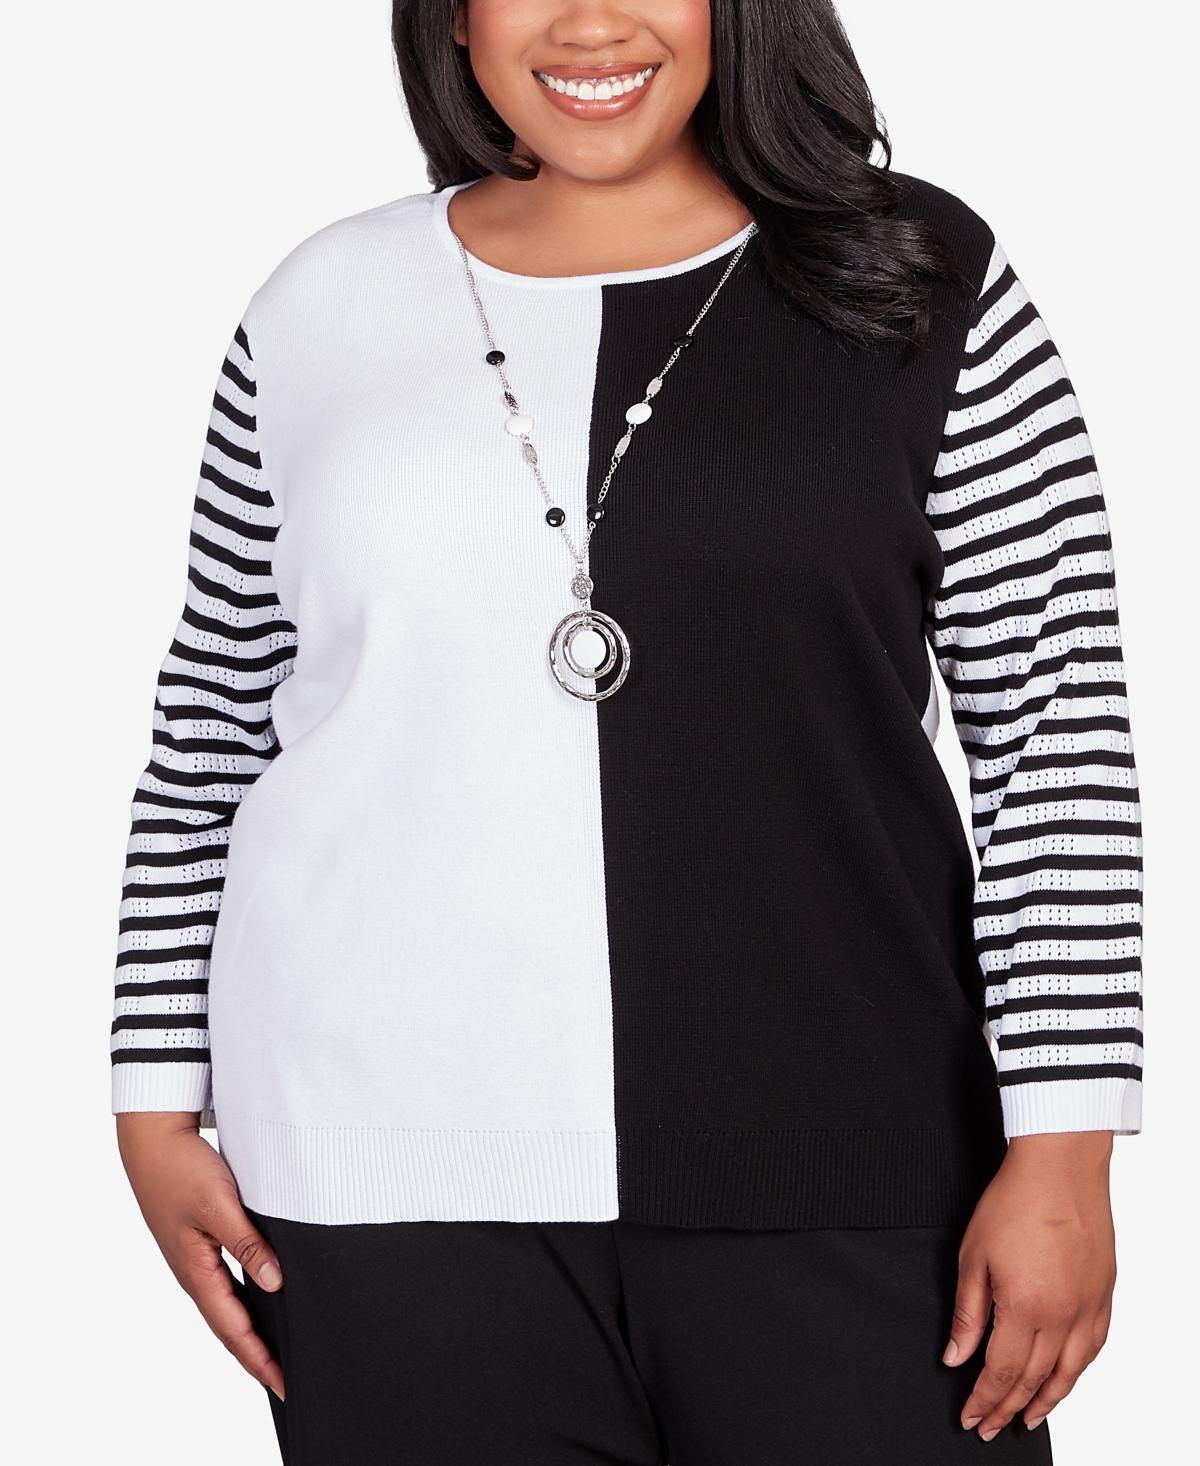 ALFRED DUNNER PLUS SIZE WORLD TRAVELER COLORBLOCK STRIPED SLEEVE SWEATER WITH NECKLACE